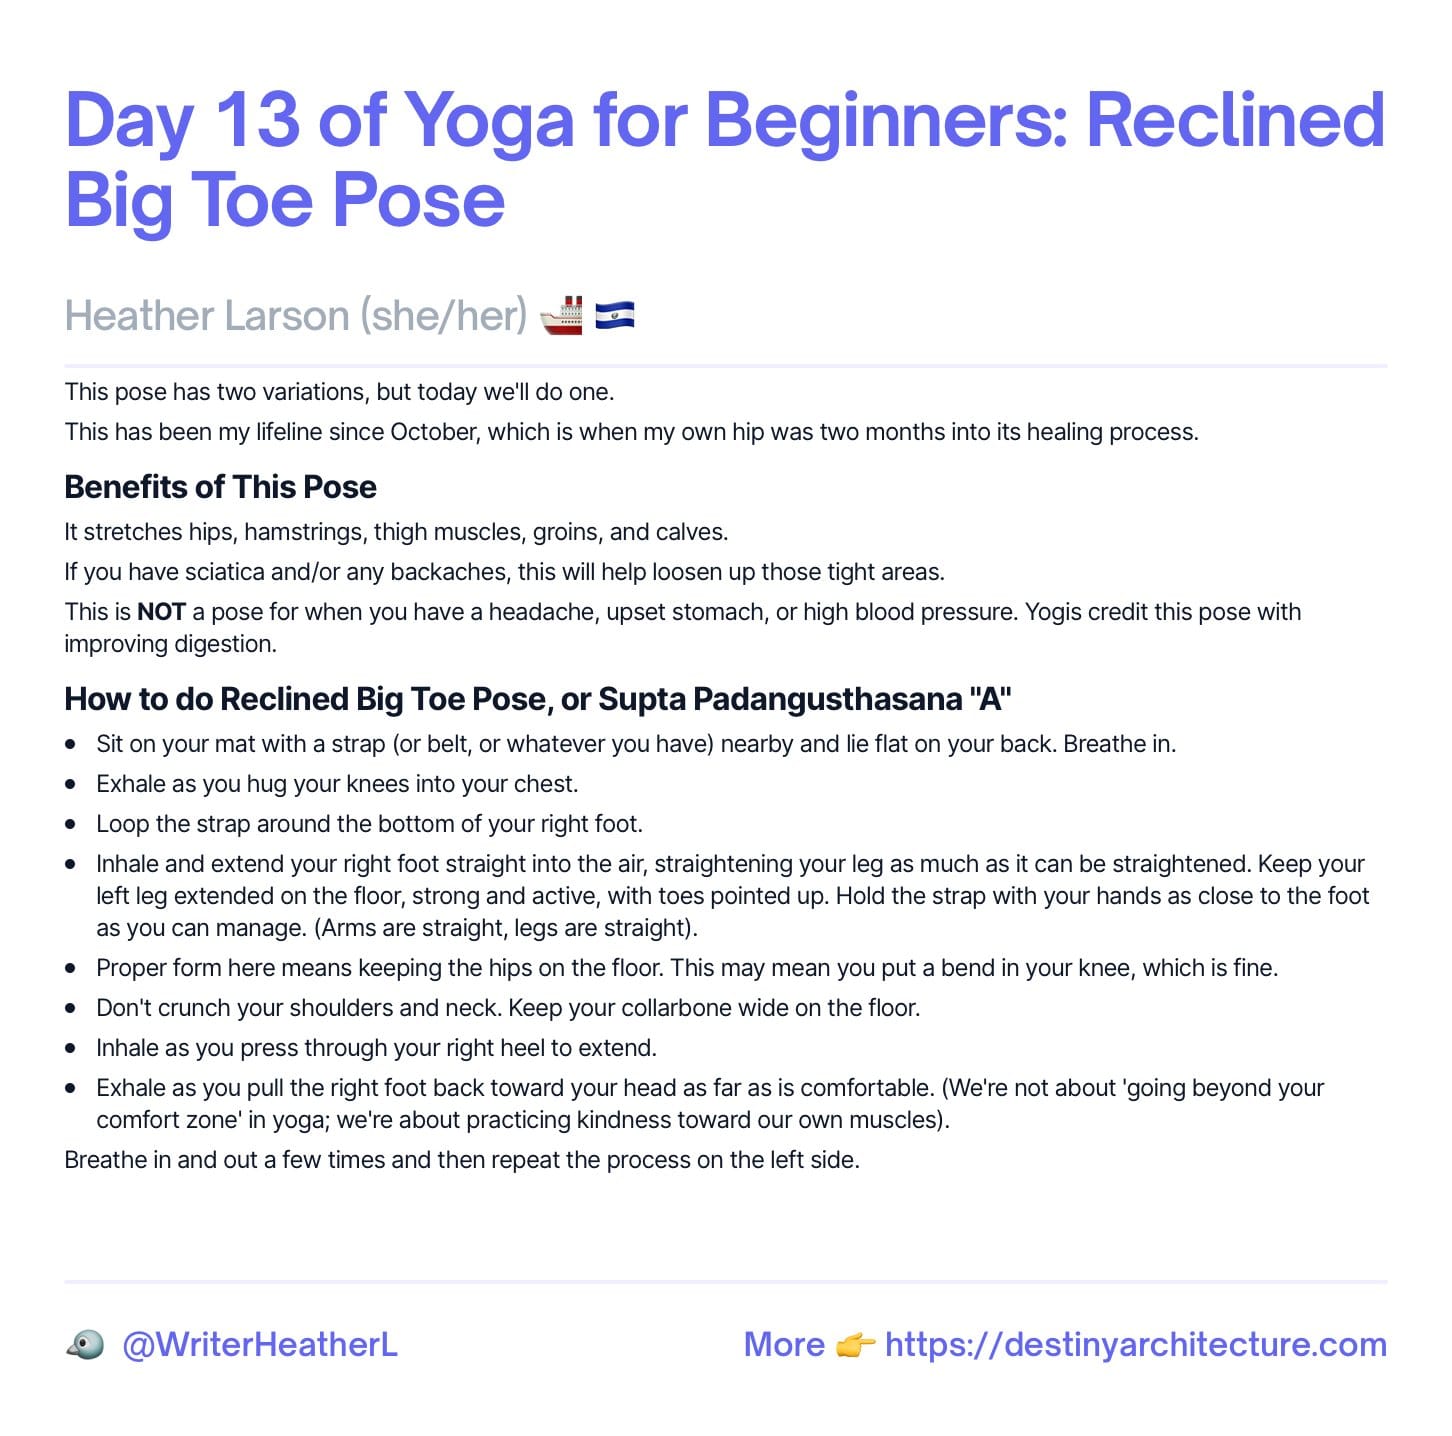 Day 13 of Yoga for Beginners: Reclined Big Toe Pose